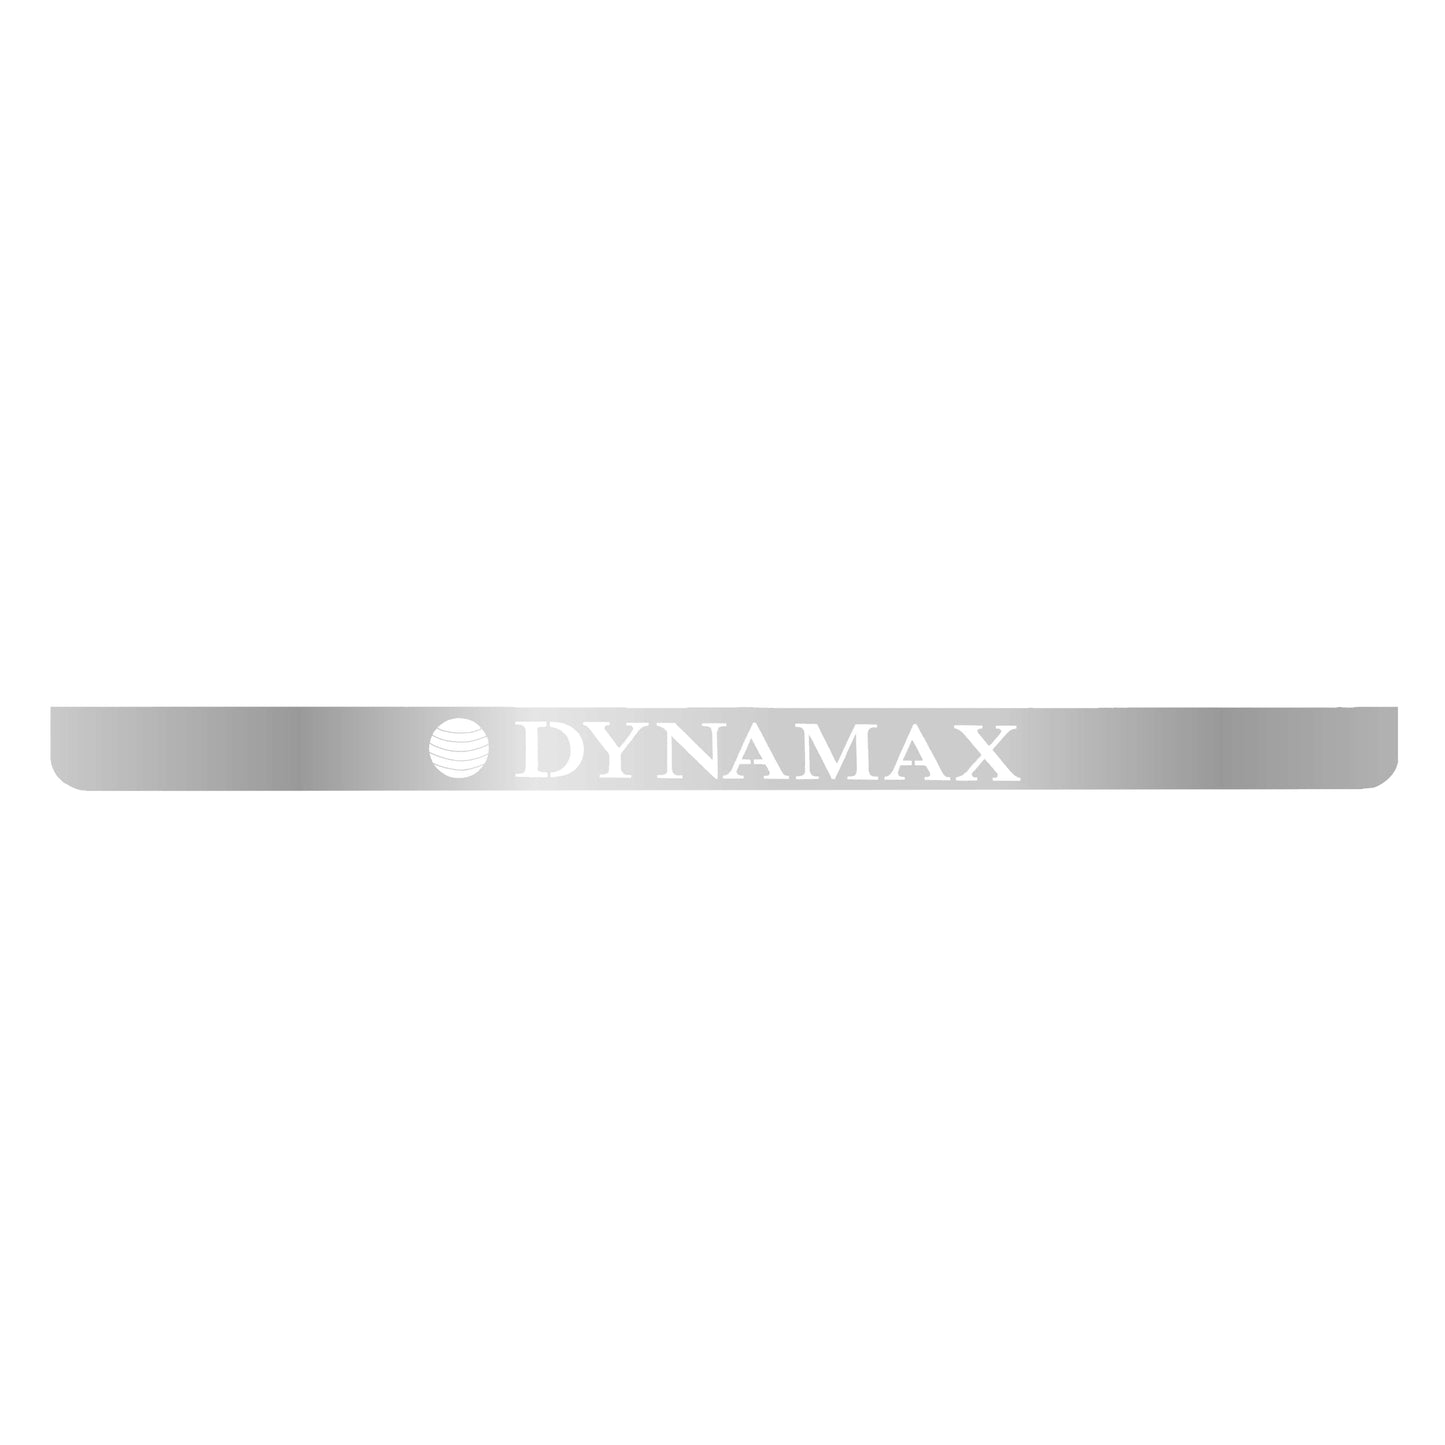 Future-Sales-Dynamax-Face-Plate-stainless-steel-mirror-finish-Height-6-Width-94-backer-plate-SSDYN-L-02M